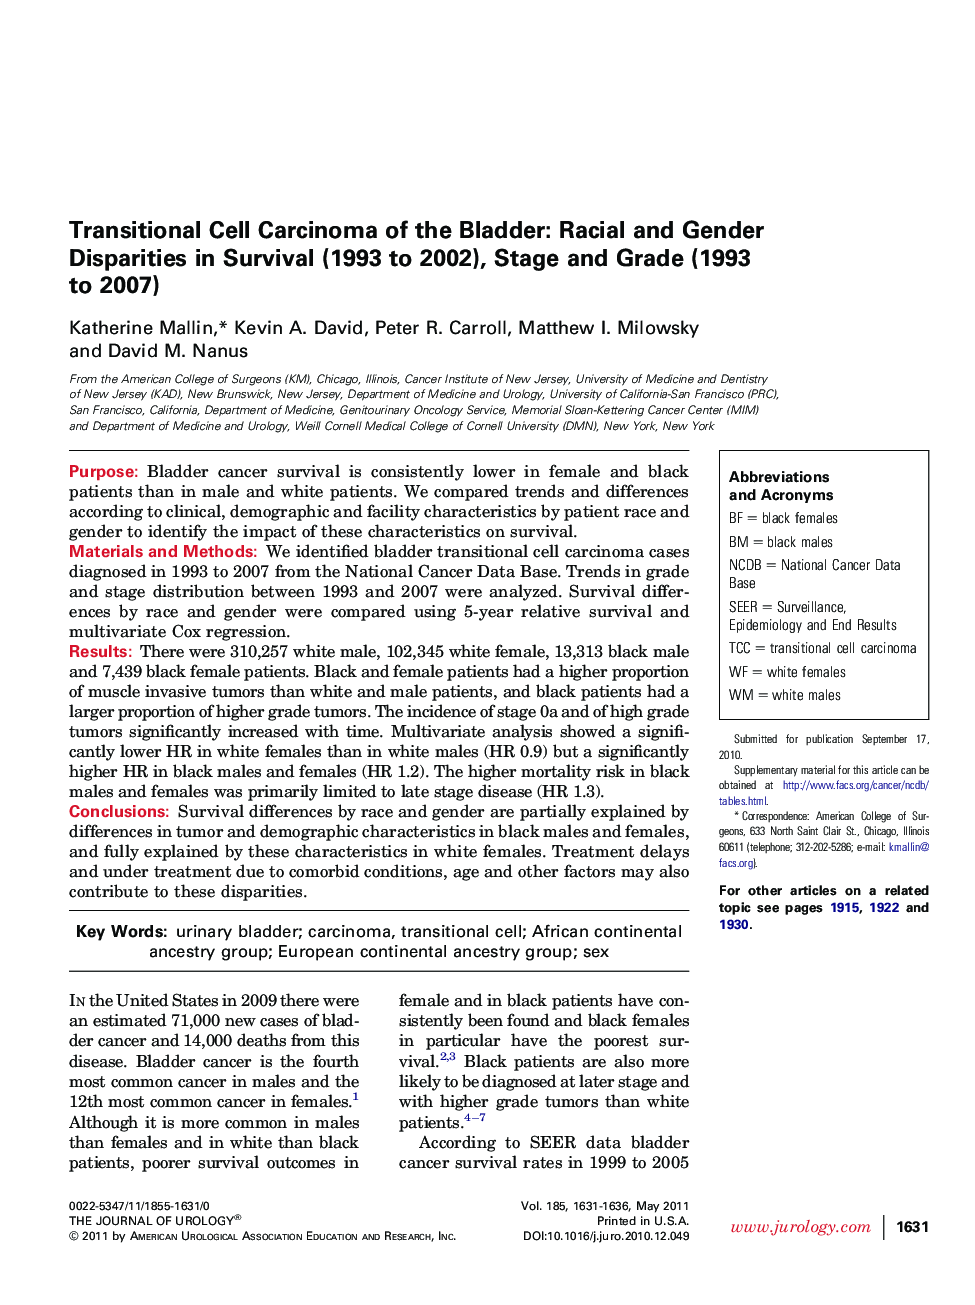 Transitional Cell Carcinoma of the Bladder: Racial and Gender Disparities in Survival (1993 to 2002), Stage and Grade (1993 to 2007)